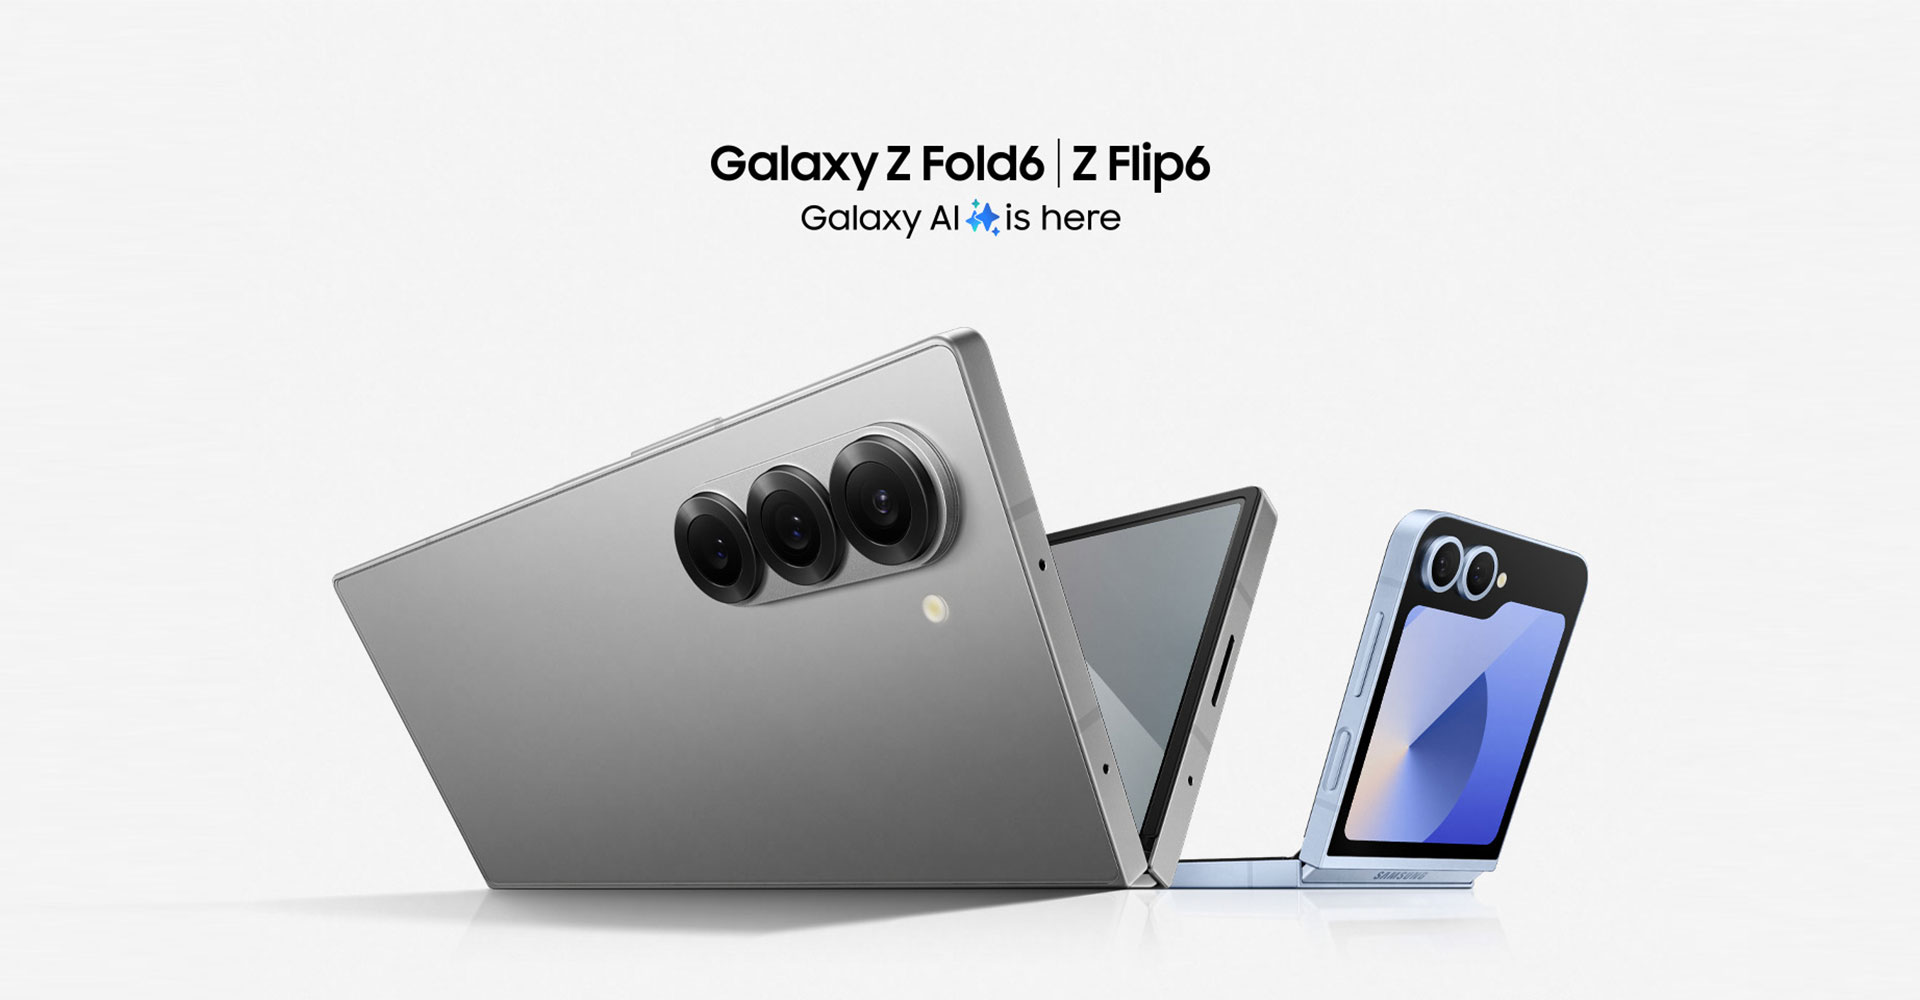 Samsung Galaxy Z Fold6 and Z Flip6 Elevate Galaxy AI to New Heights